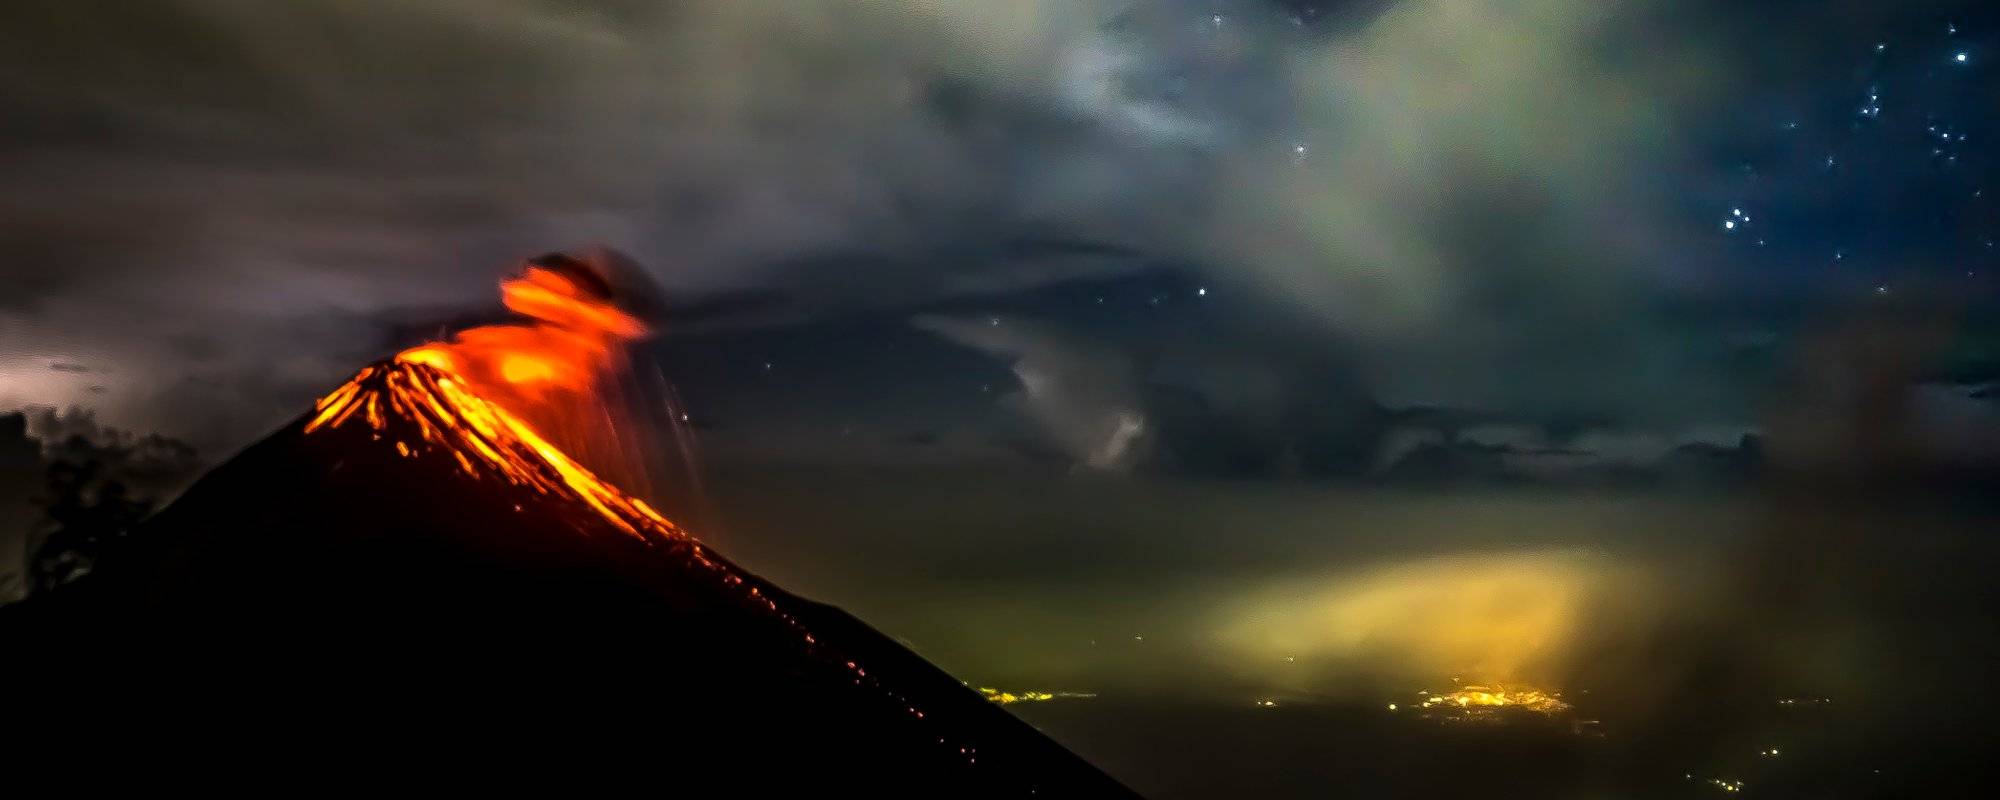 Guatemala Part 6: Spending an unforgettable Night and Sunrise at the Volcano Acatenango (Fotos + Videos)